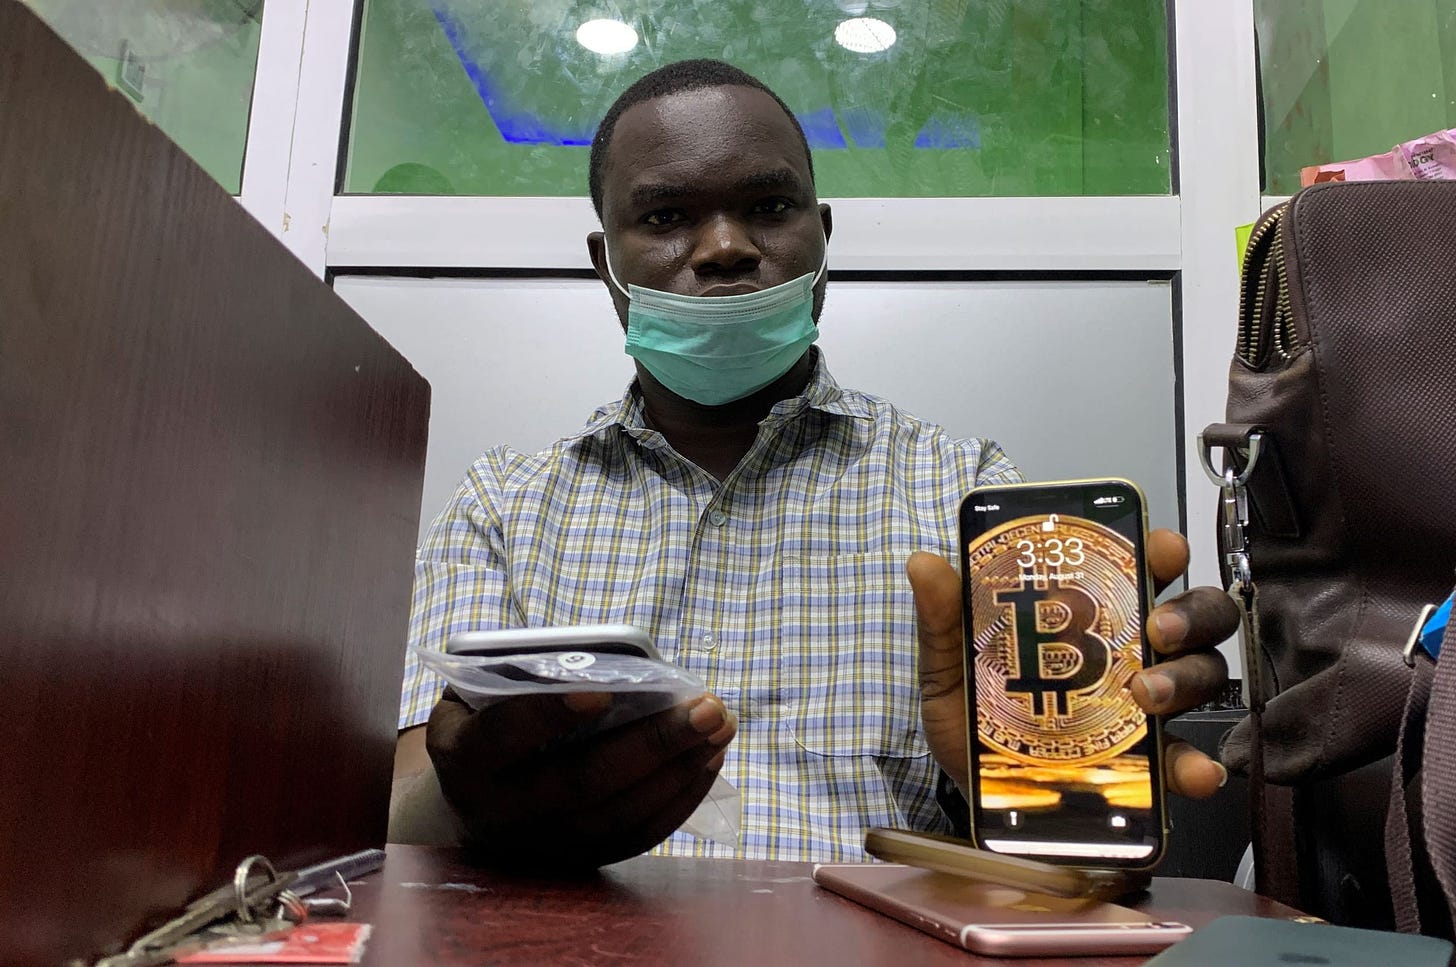 How bitcoin met the real world in Africa